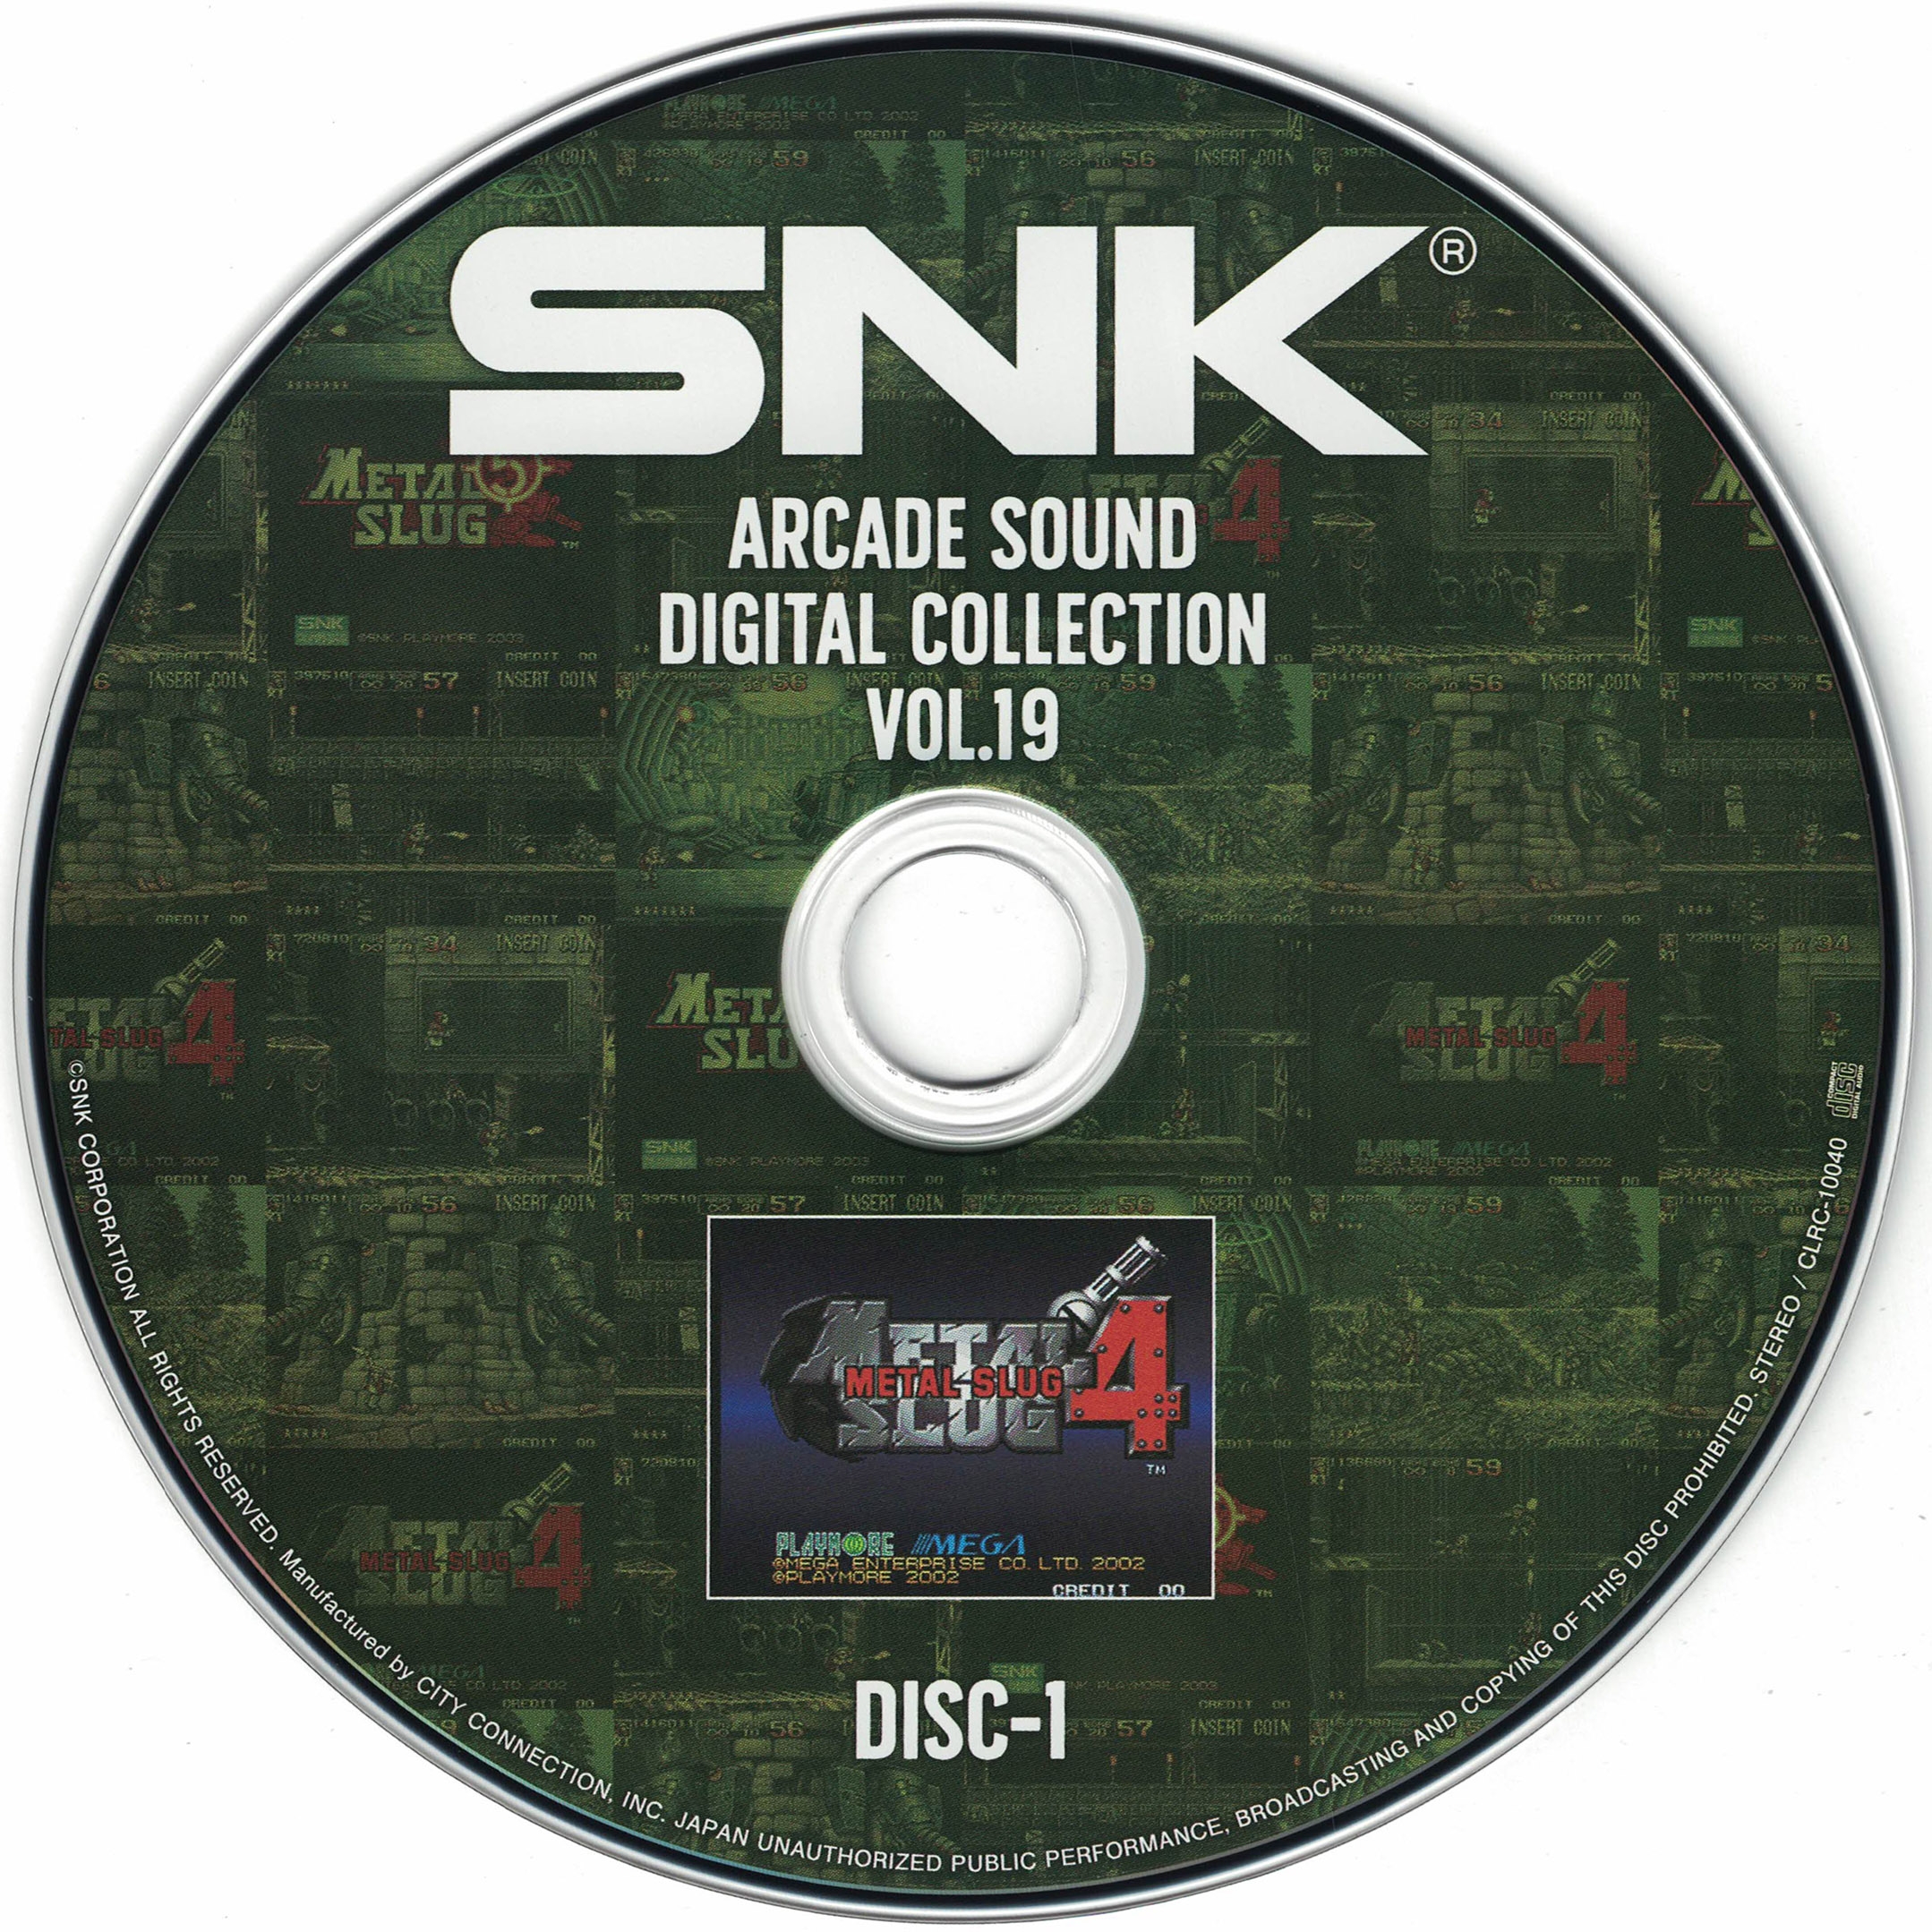 SNK ARCADE SOUND DIGITAL COLLECTION VOL.19 (2020) MP3 - Download SNK ARCADE  SOUND DIGITAL COLLECTION VOL.19 (2020) Soundtracks for FREE!